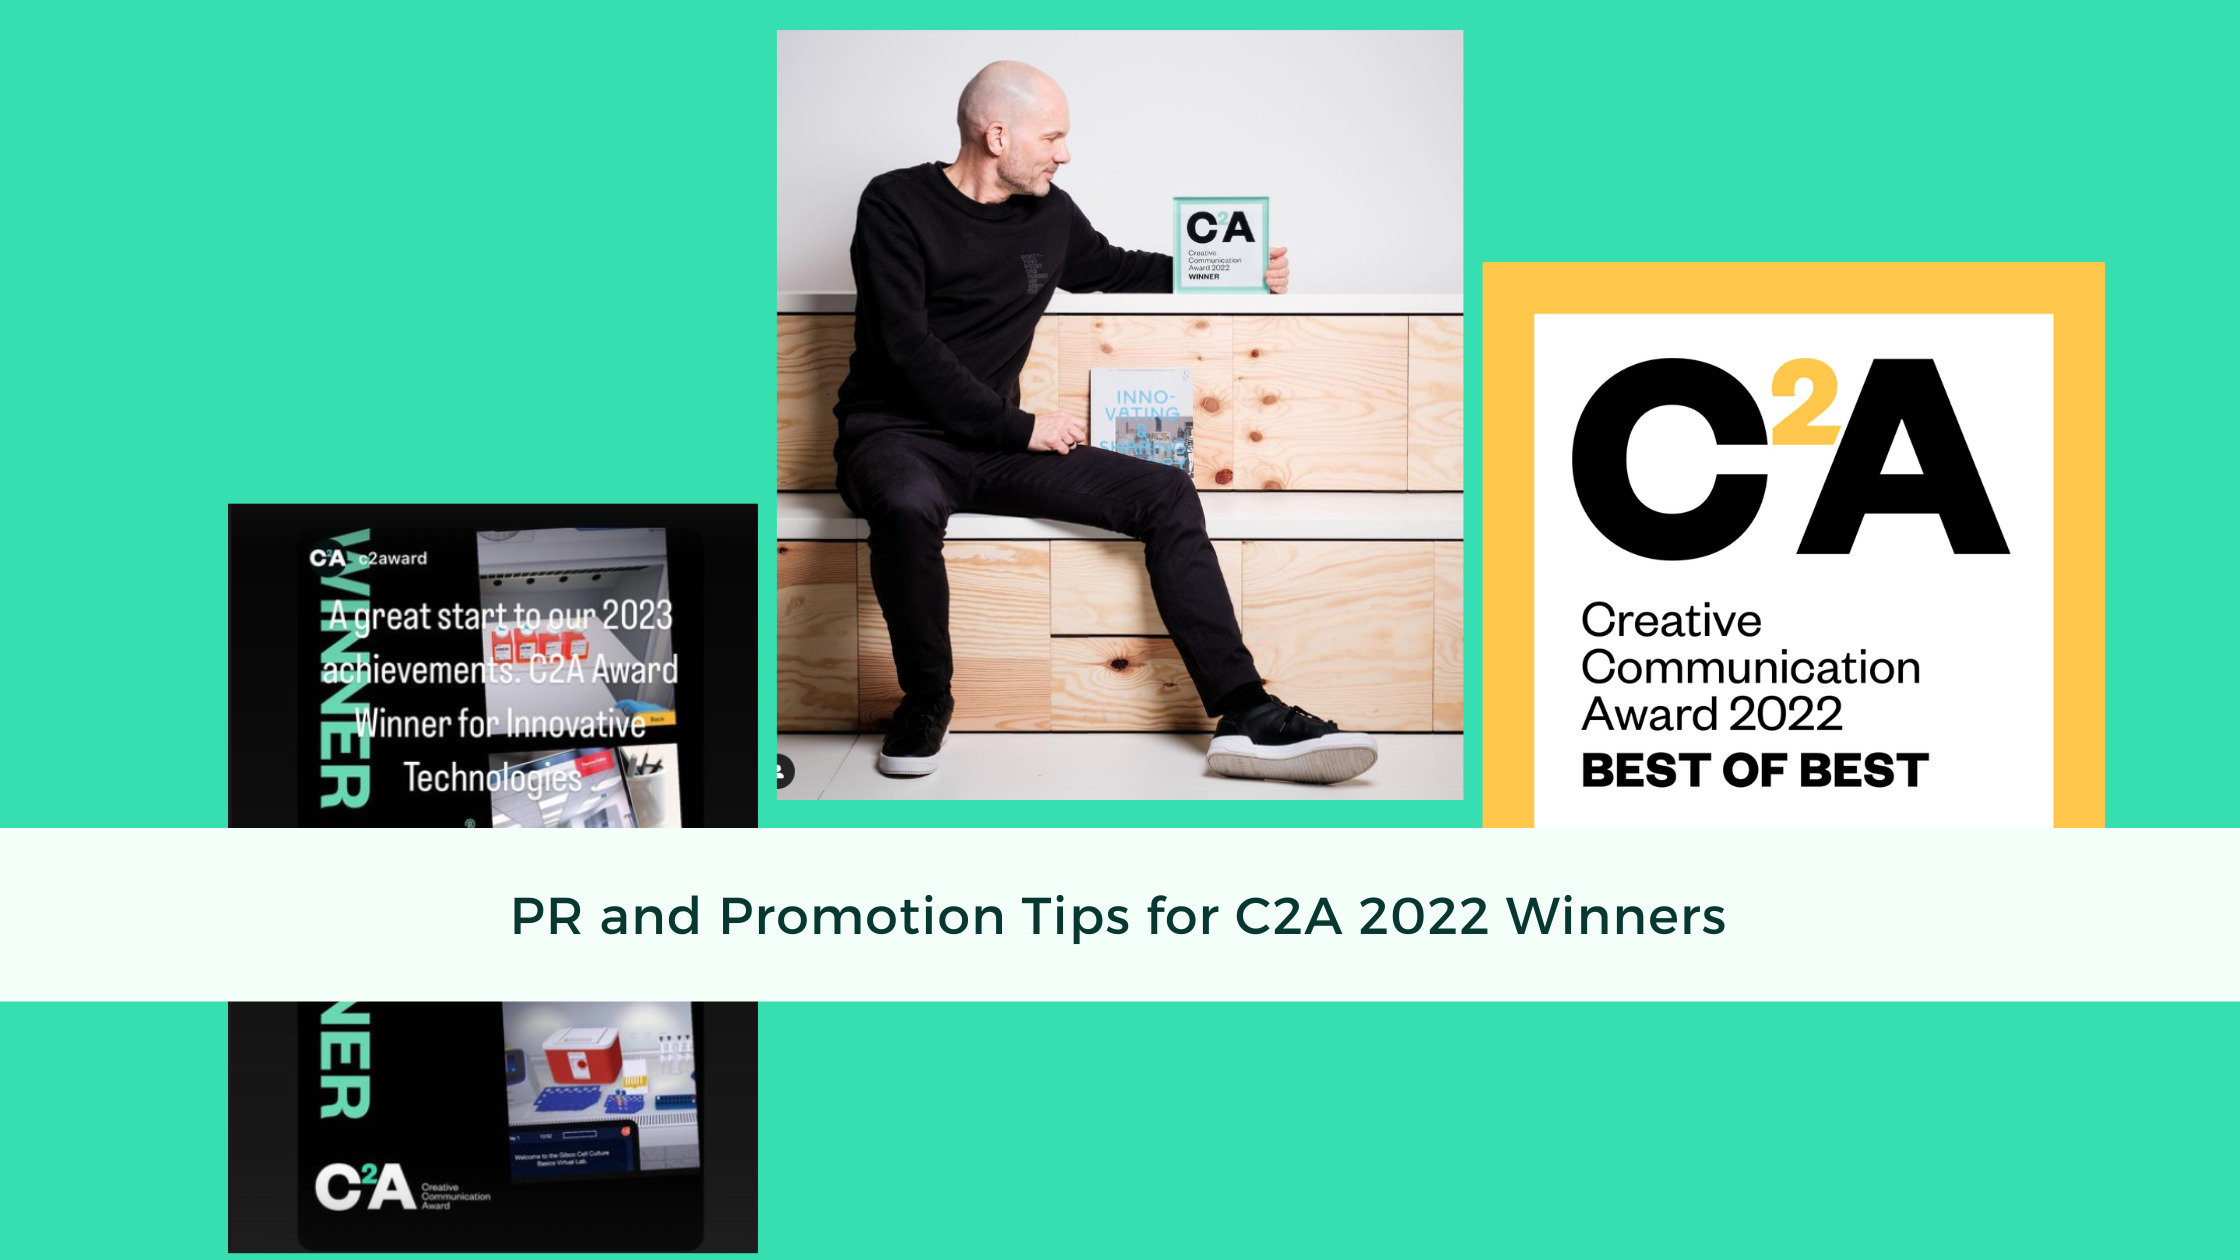 PR & Promotion Tips for C2A 2022 Winners